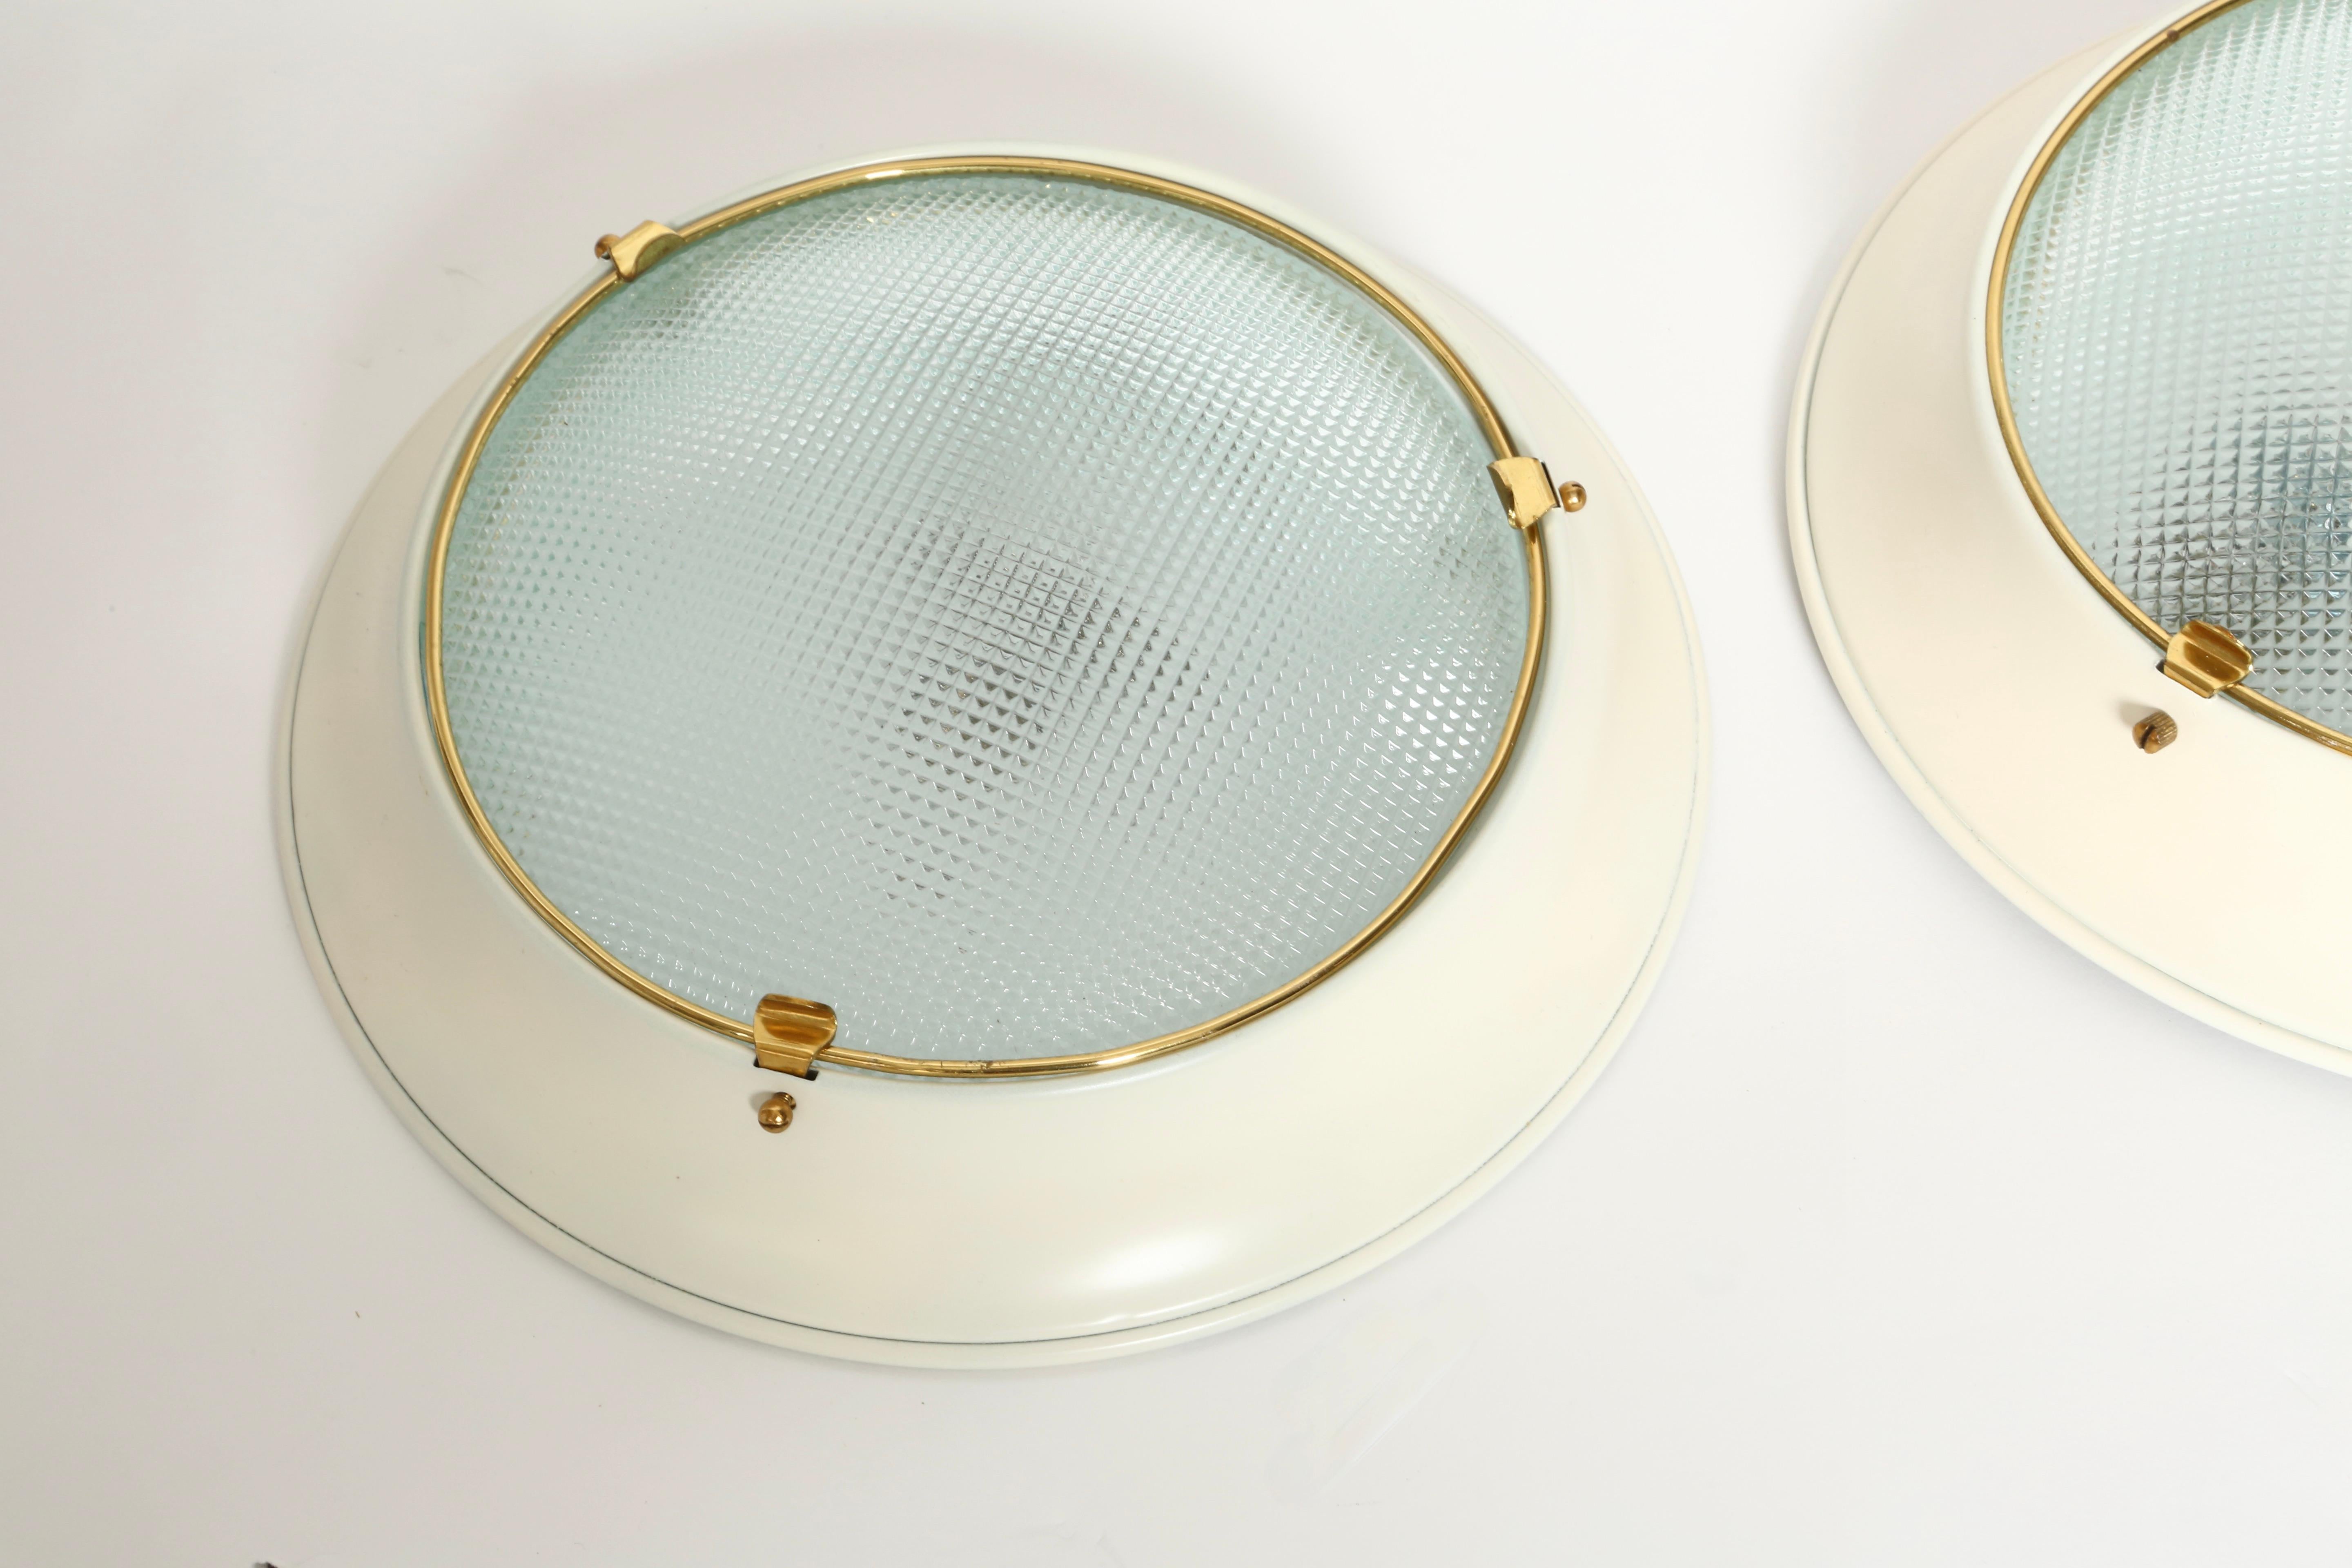 Stilnovo style flush mount wall or ceiling lights.
Glass, brass, enameled metal.
One medium base socket each.
Rewired for US.
Price is for one light.
8 lights are available
 